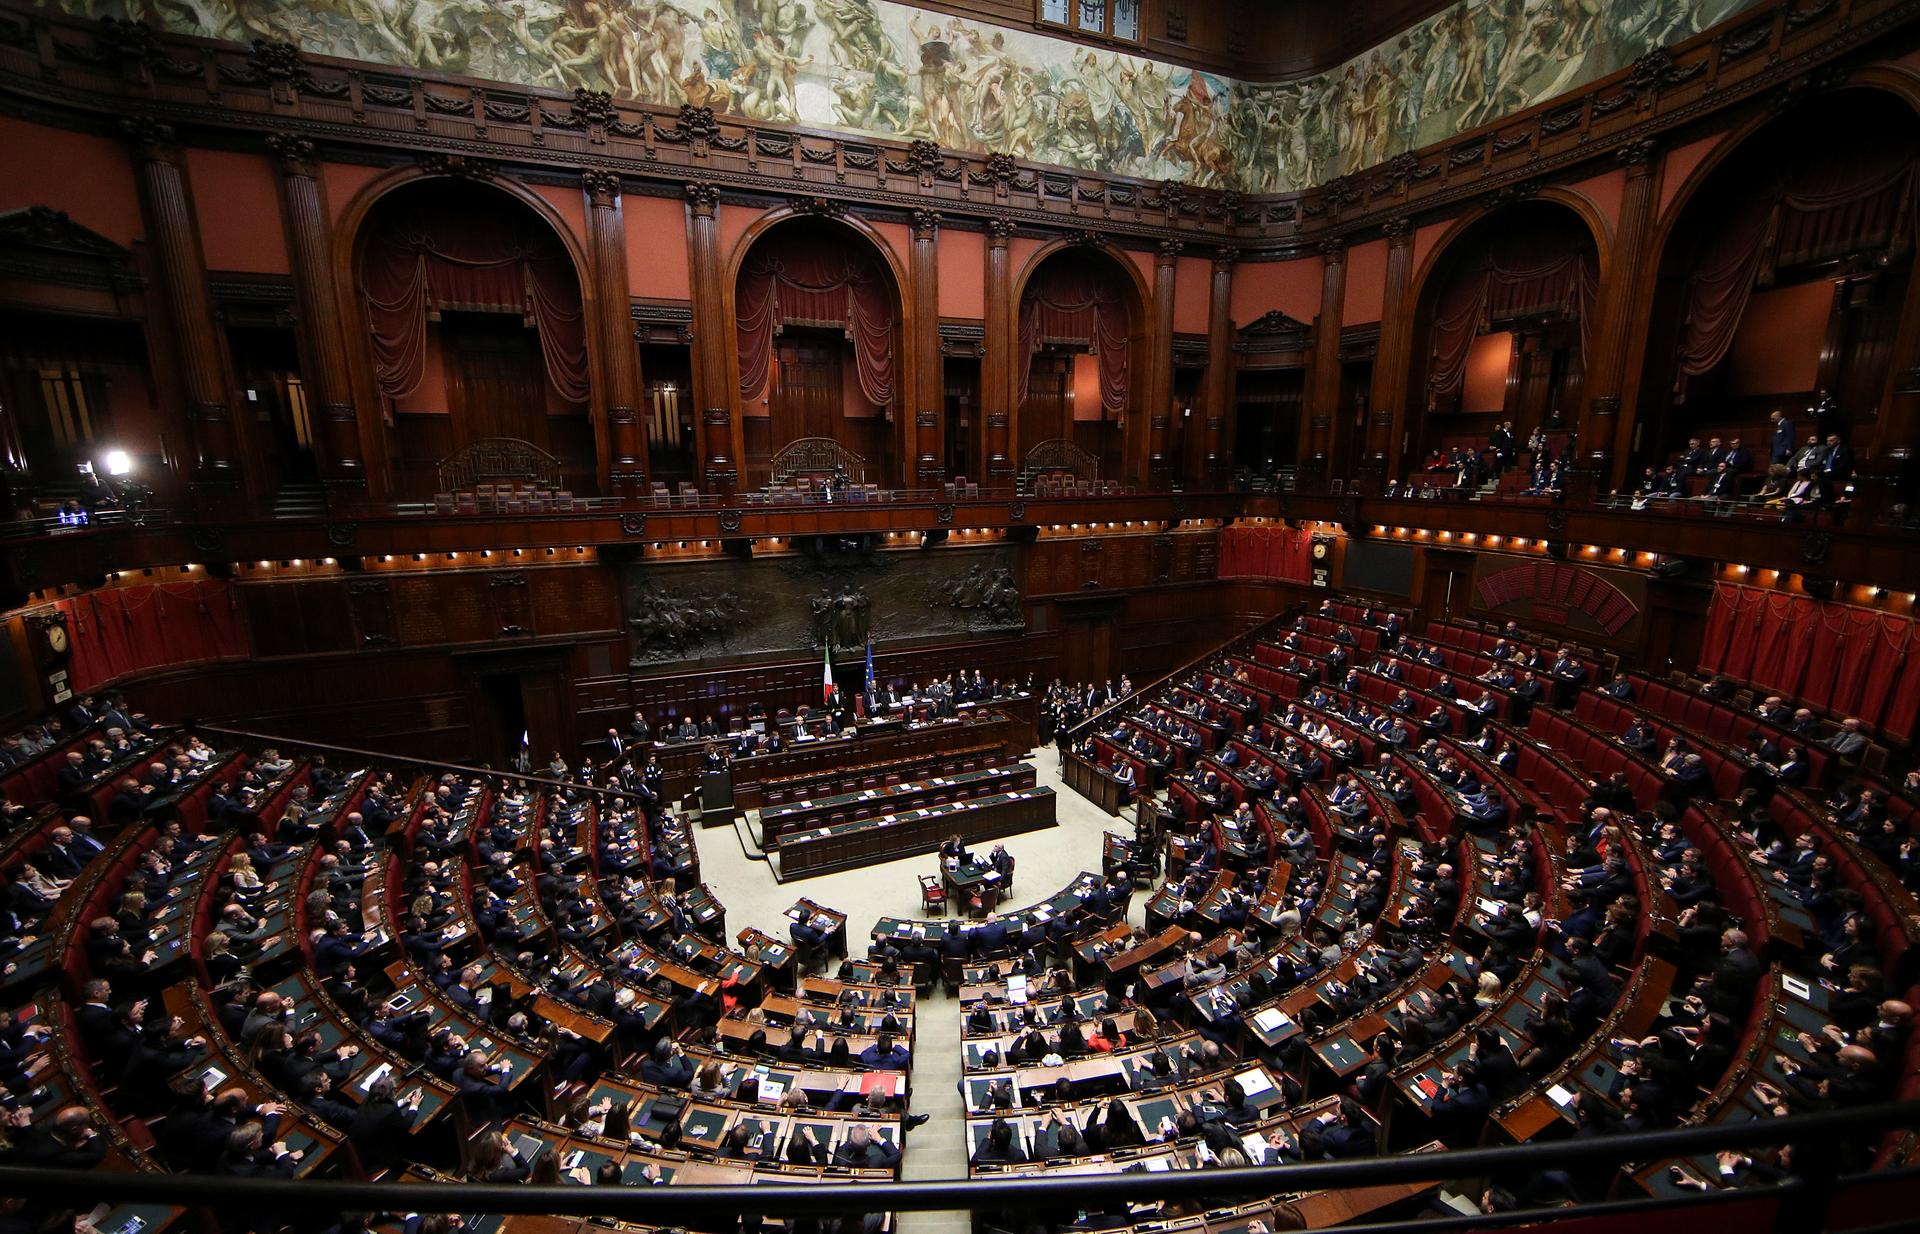 The new Chamber of Deputies president, Five Star Movement (M5S) Roberto Fico speaks at the Chamber of Deputies